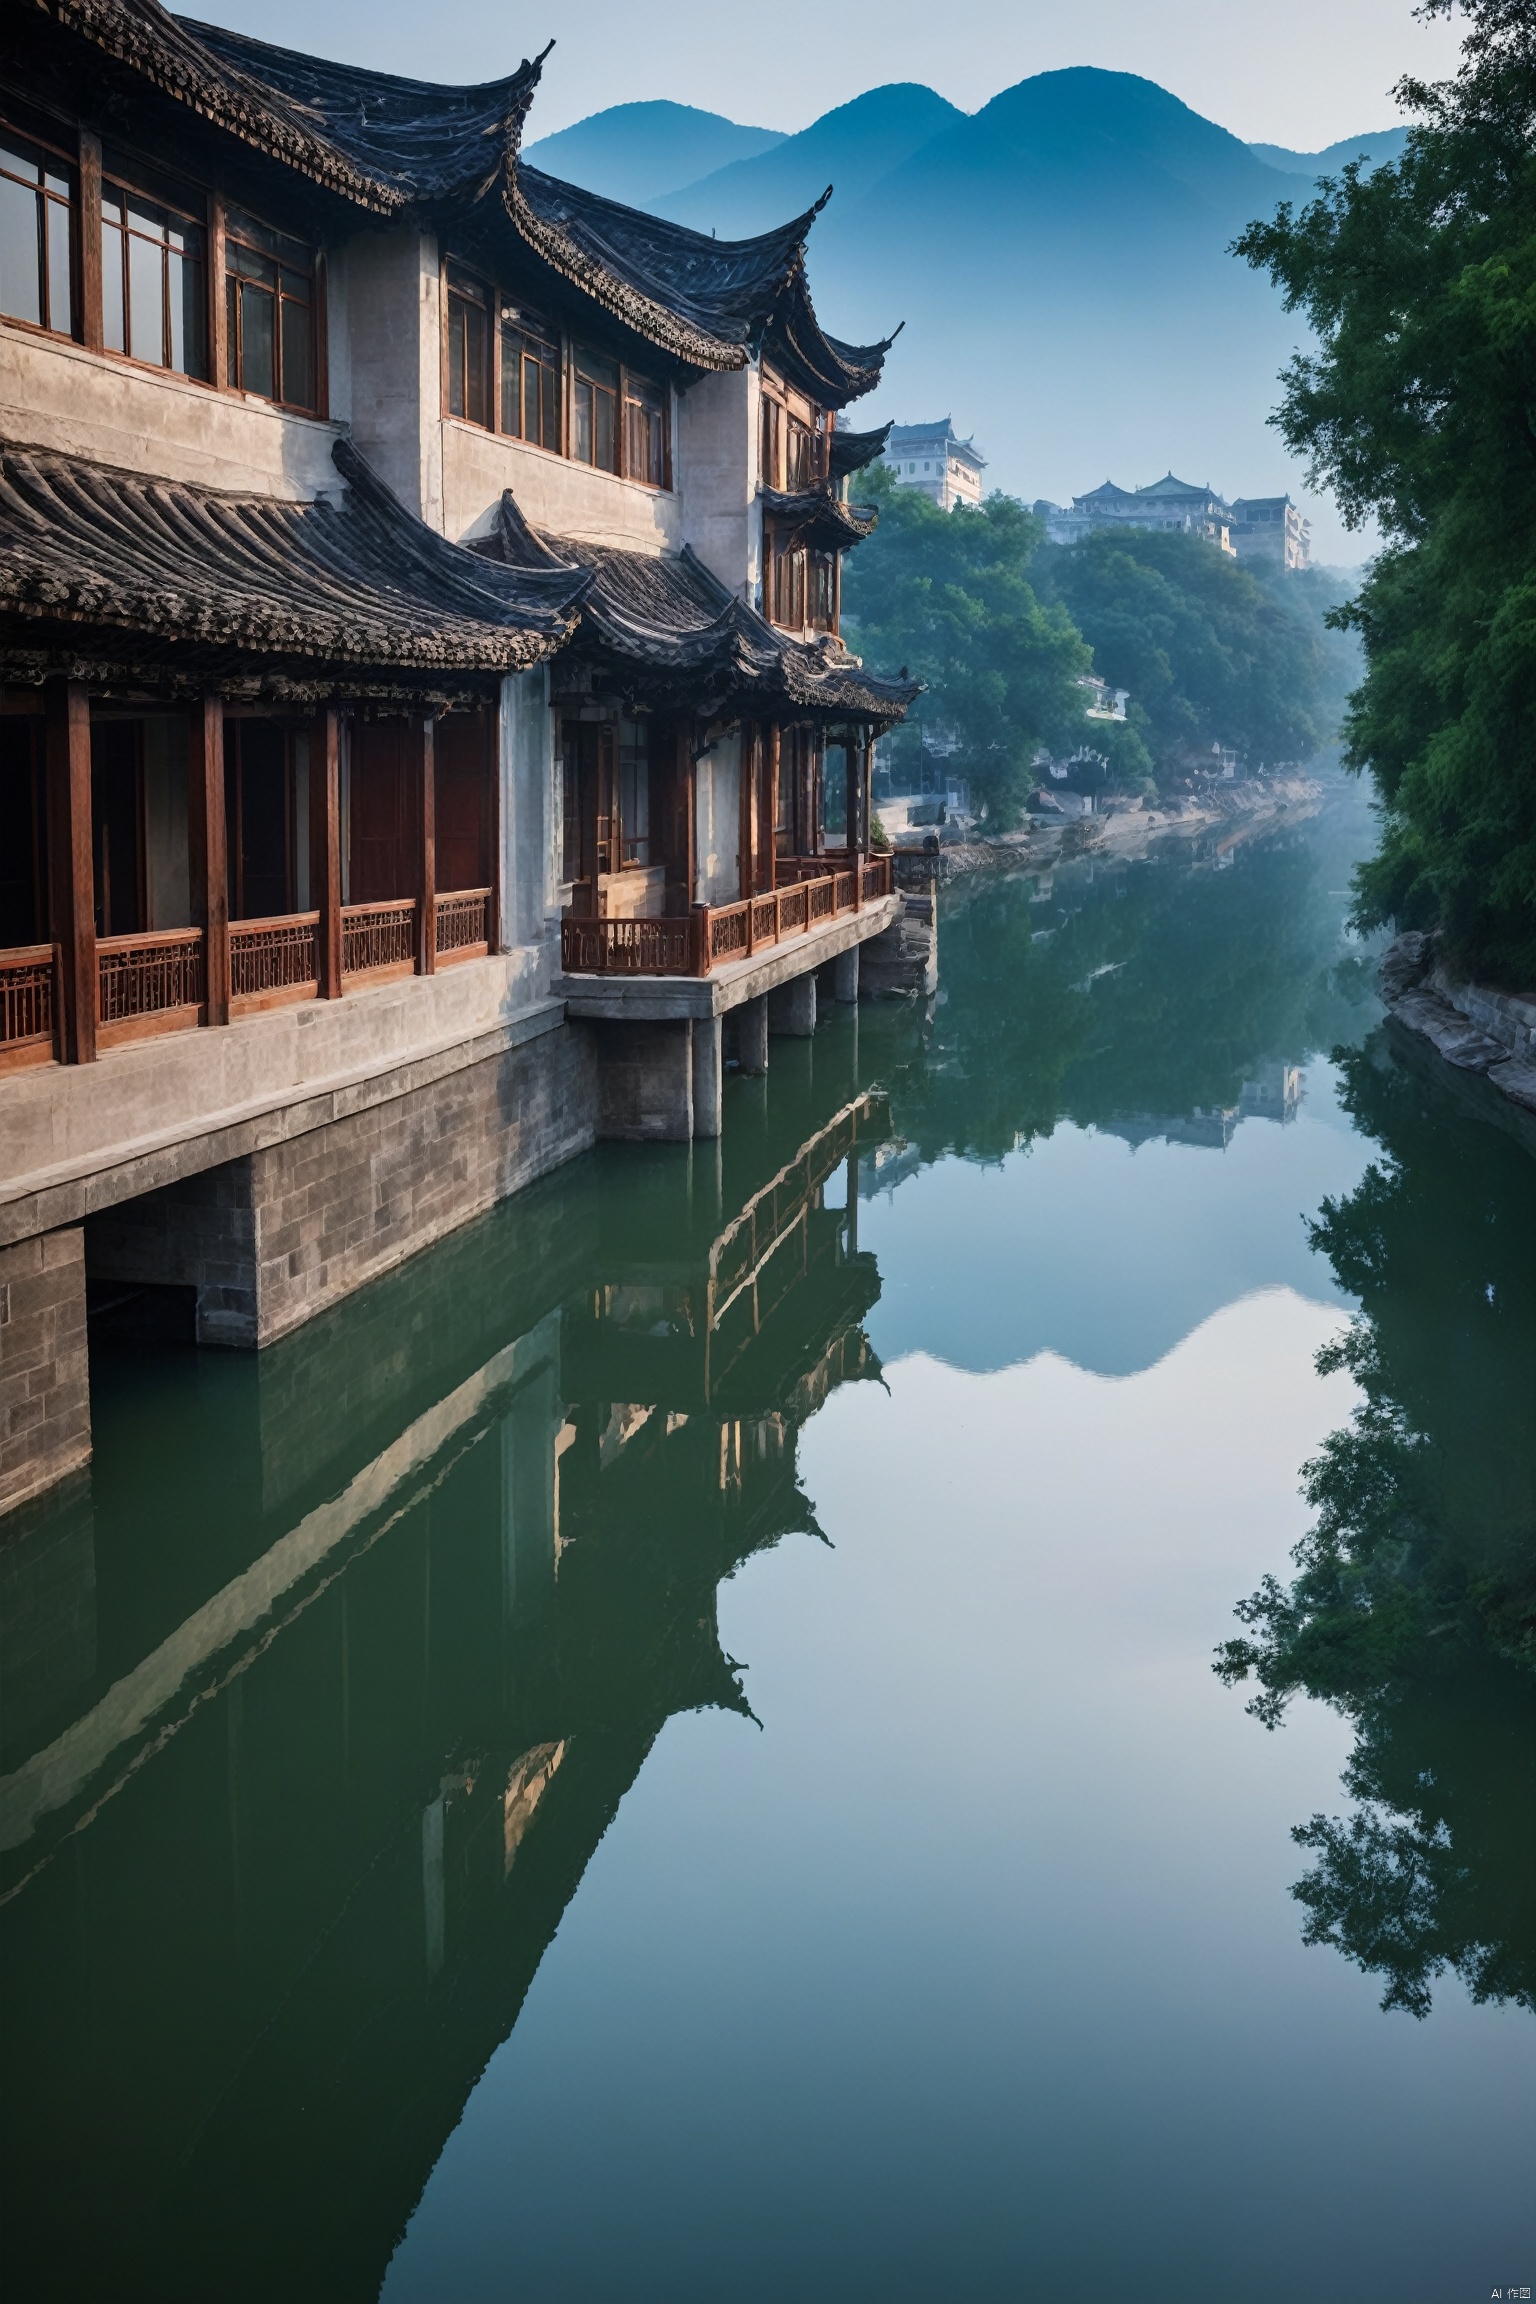 In Ganzhou, Bahjing Terrace offers a surreal view of the tranquil Gan River, captured in ethereal photography. Reflections dance upon the water's surface, blending reality with dreams. Amidst this serene ambiance, history whispers secrets of bygone eras.